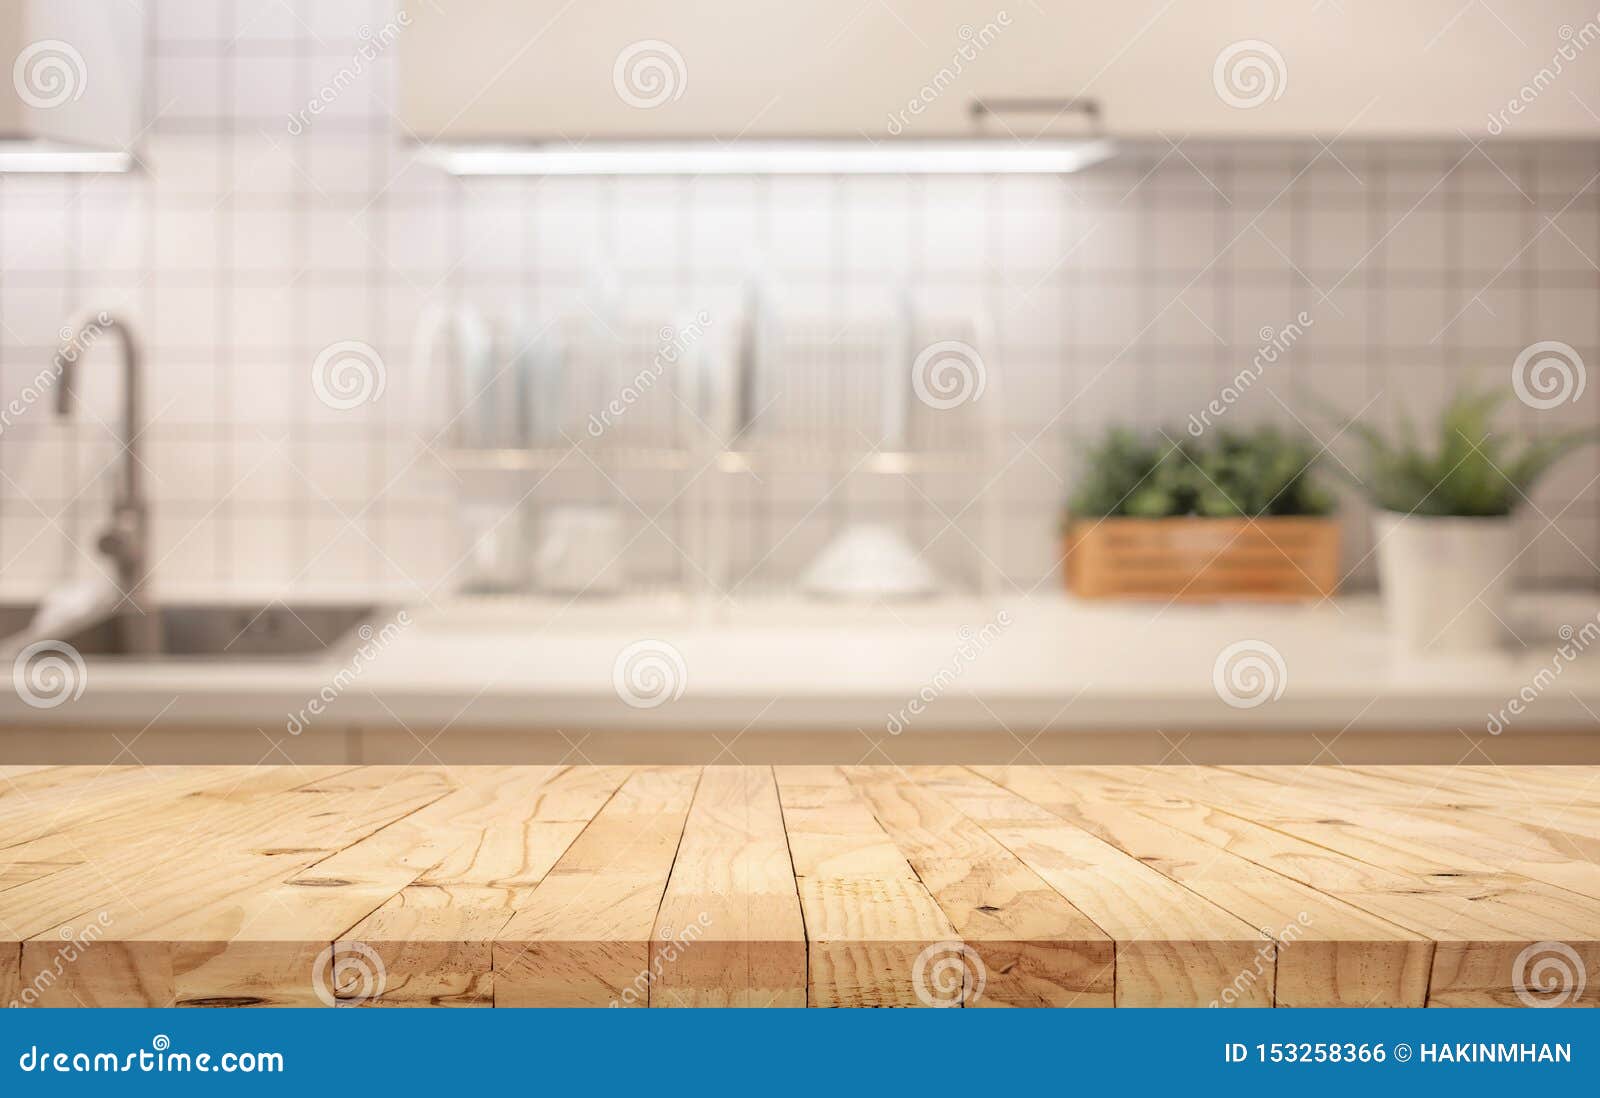 Wood Table Top on Blur Kitchen Counter Roombackground Stock Photo ...